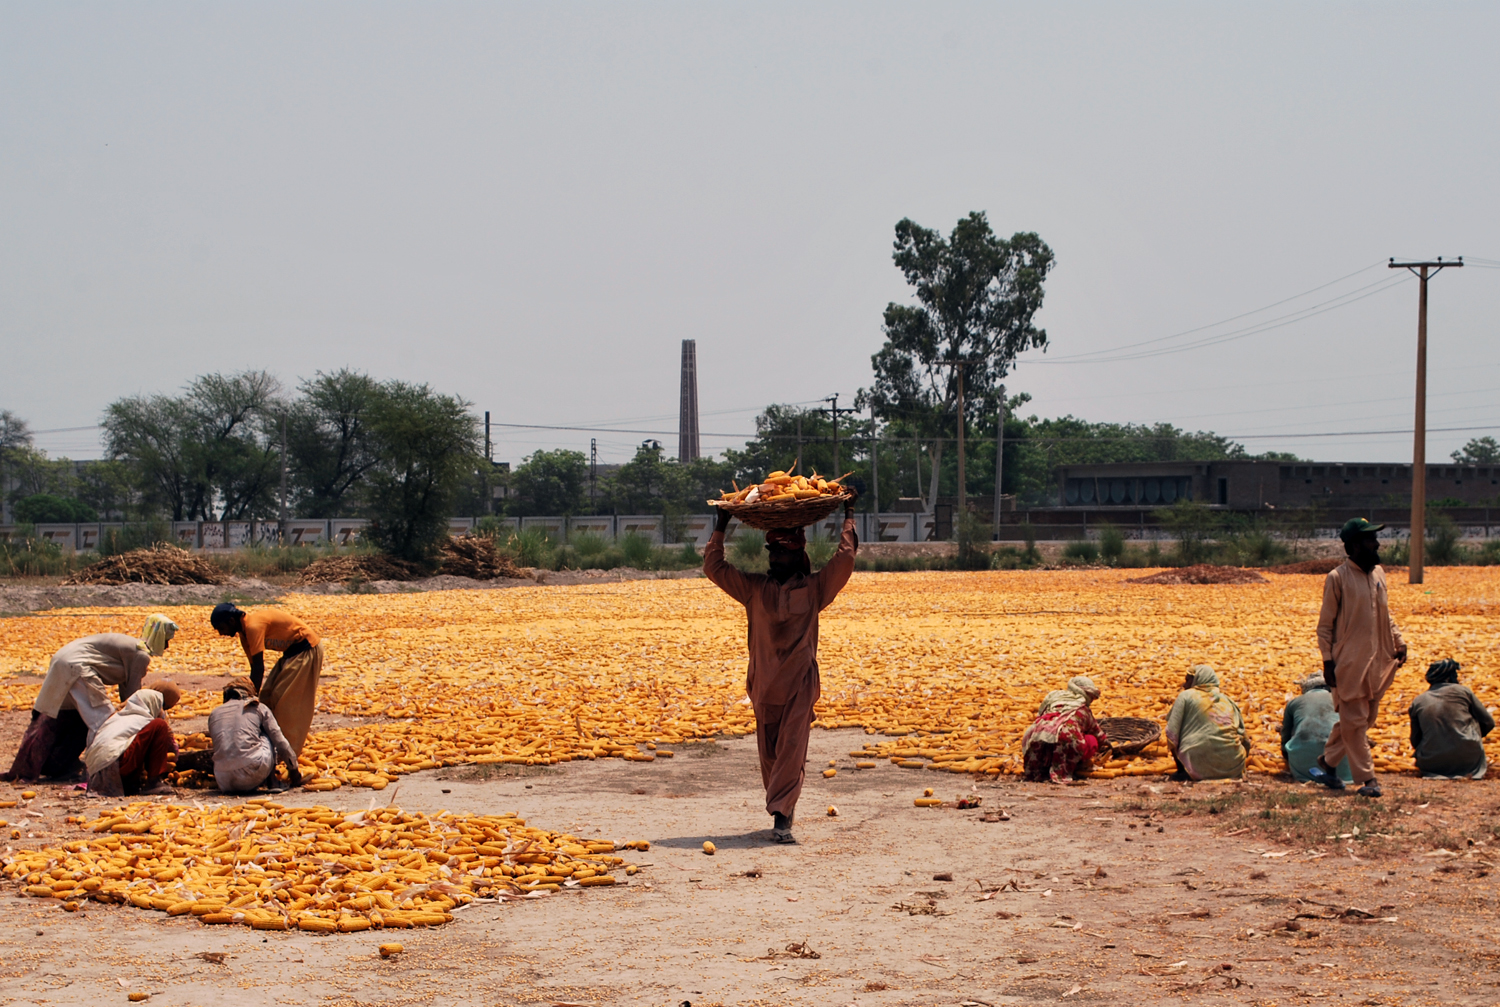 FAISALABAD: Laborers are busy in collecting corns at a local warehouse in Faisalabad